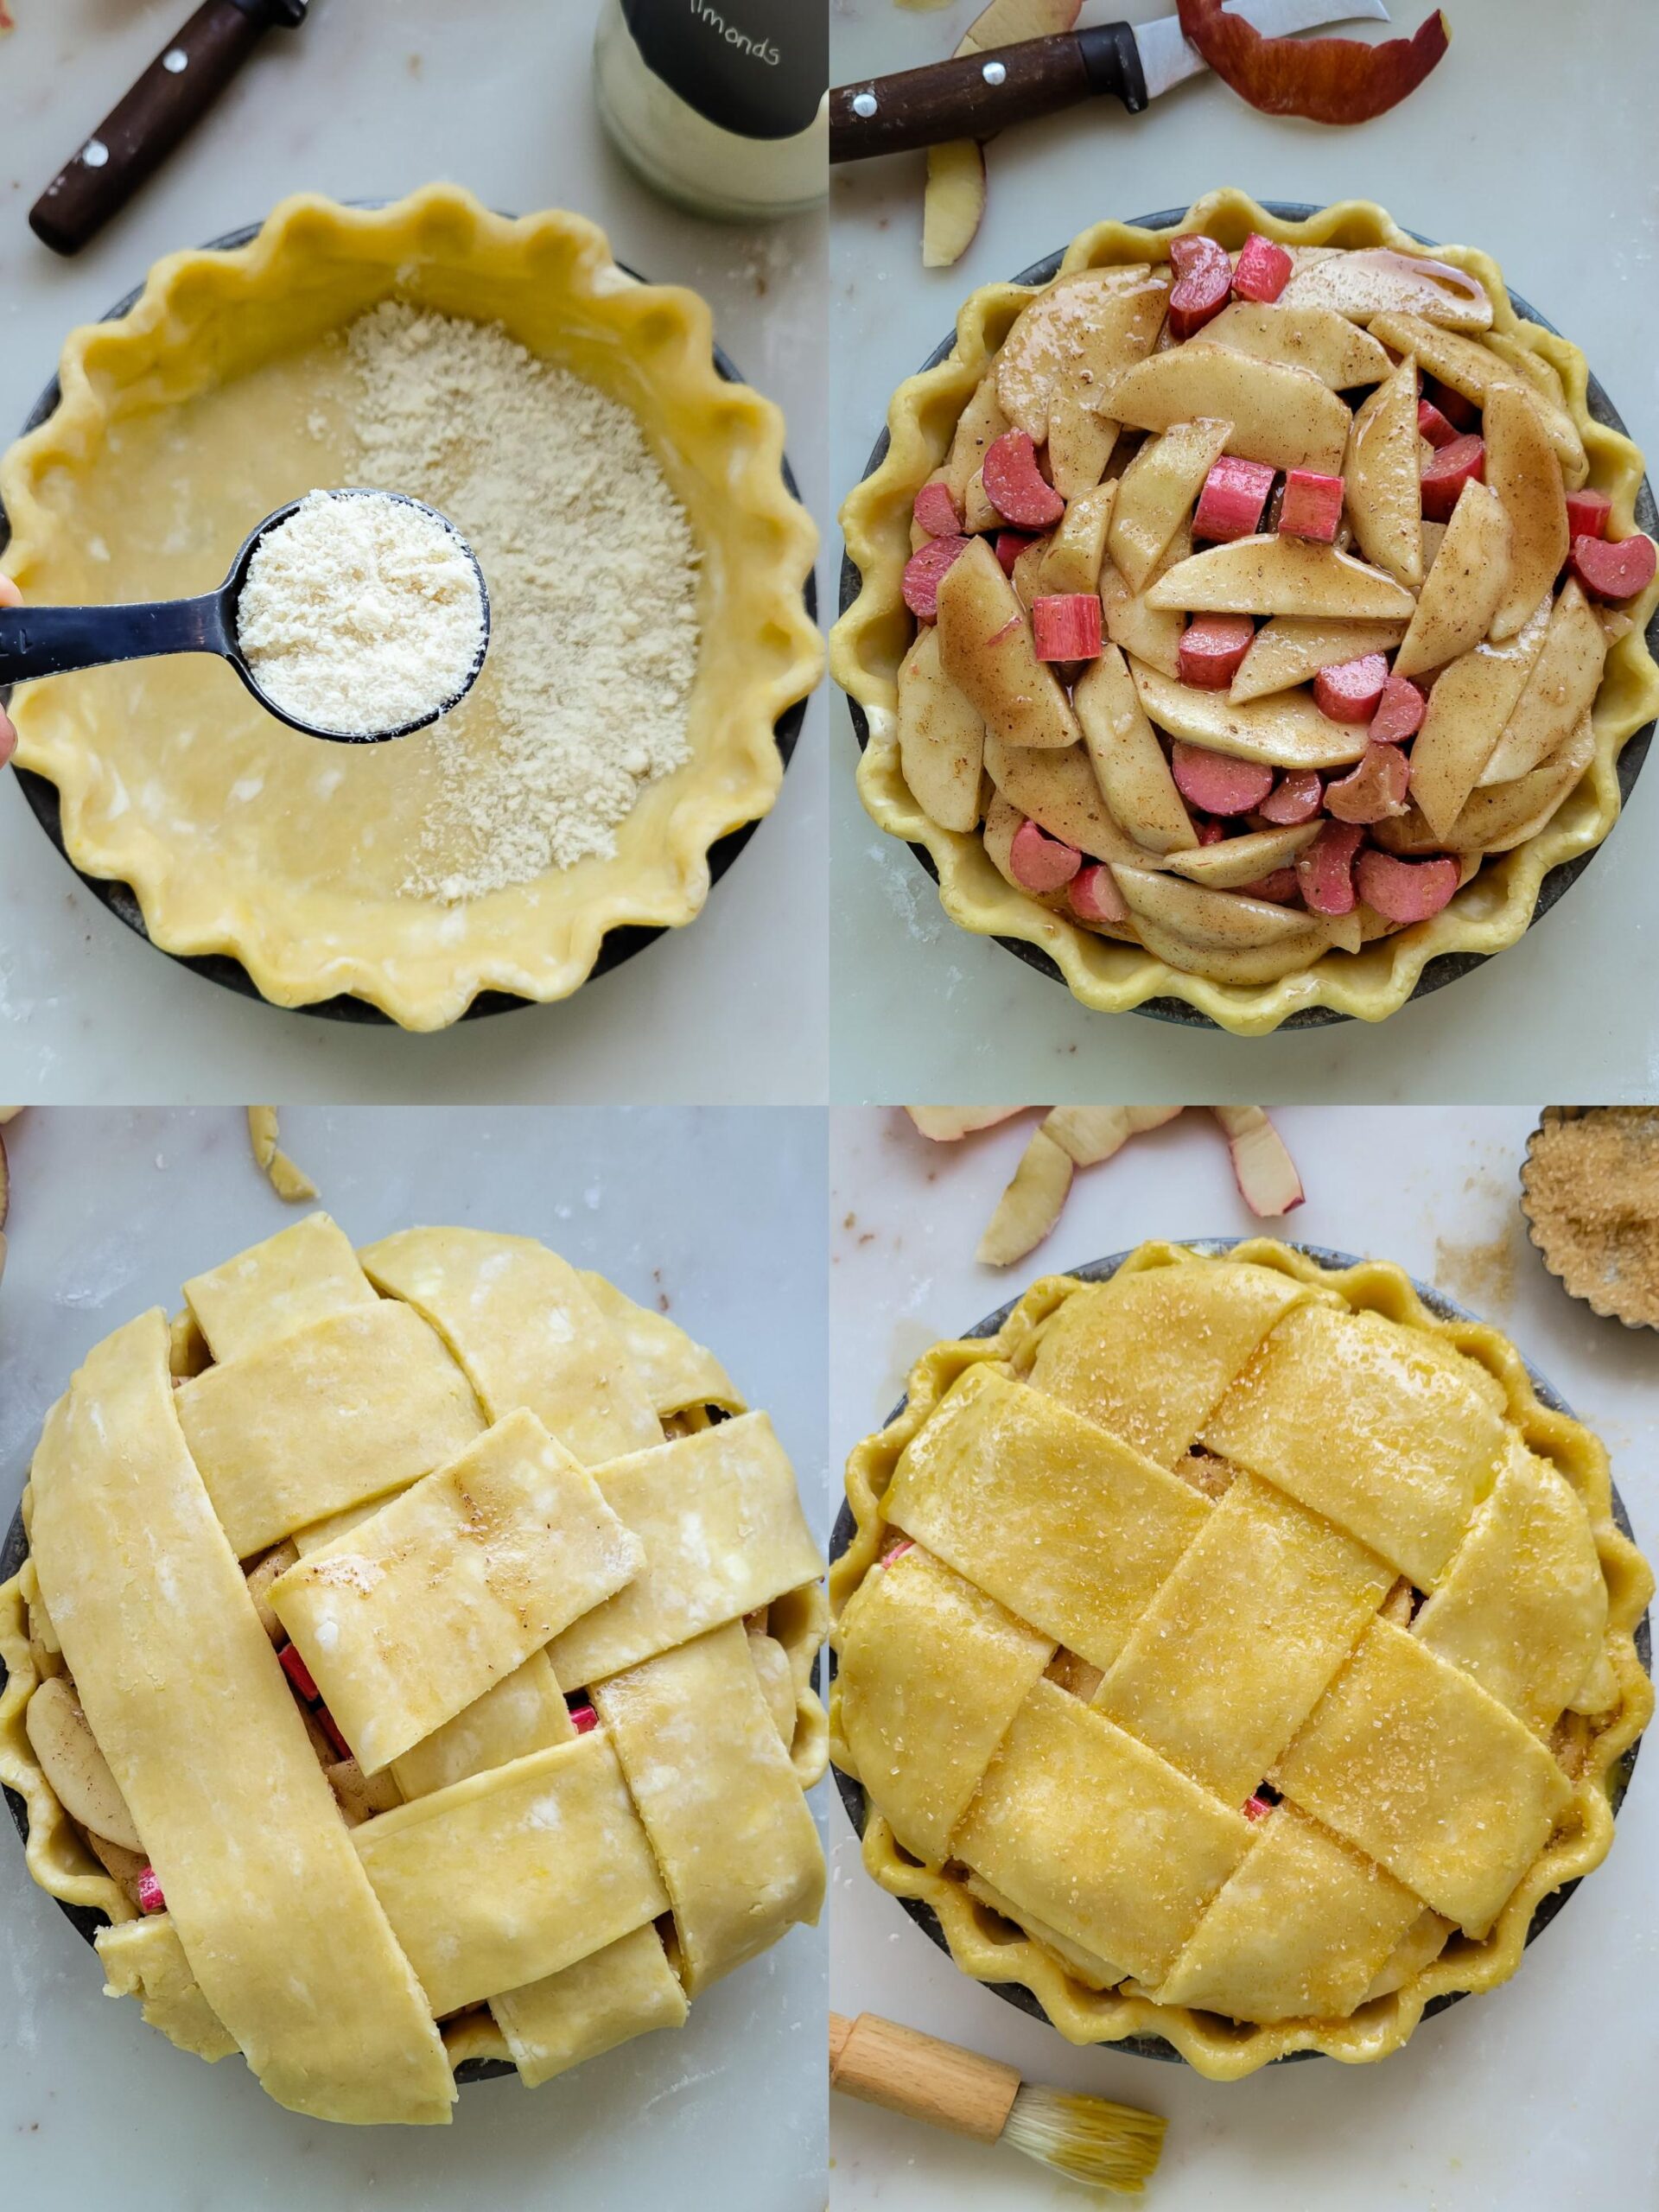 Collage showing the preparing a Apple Rhubarb Pie for baking.